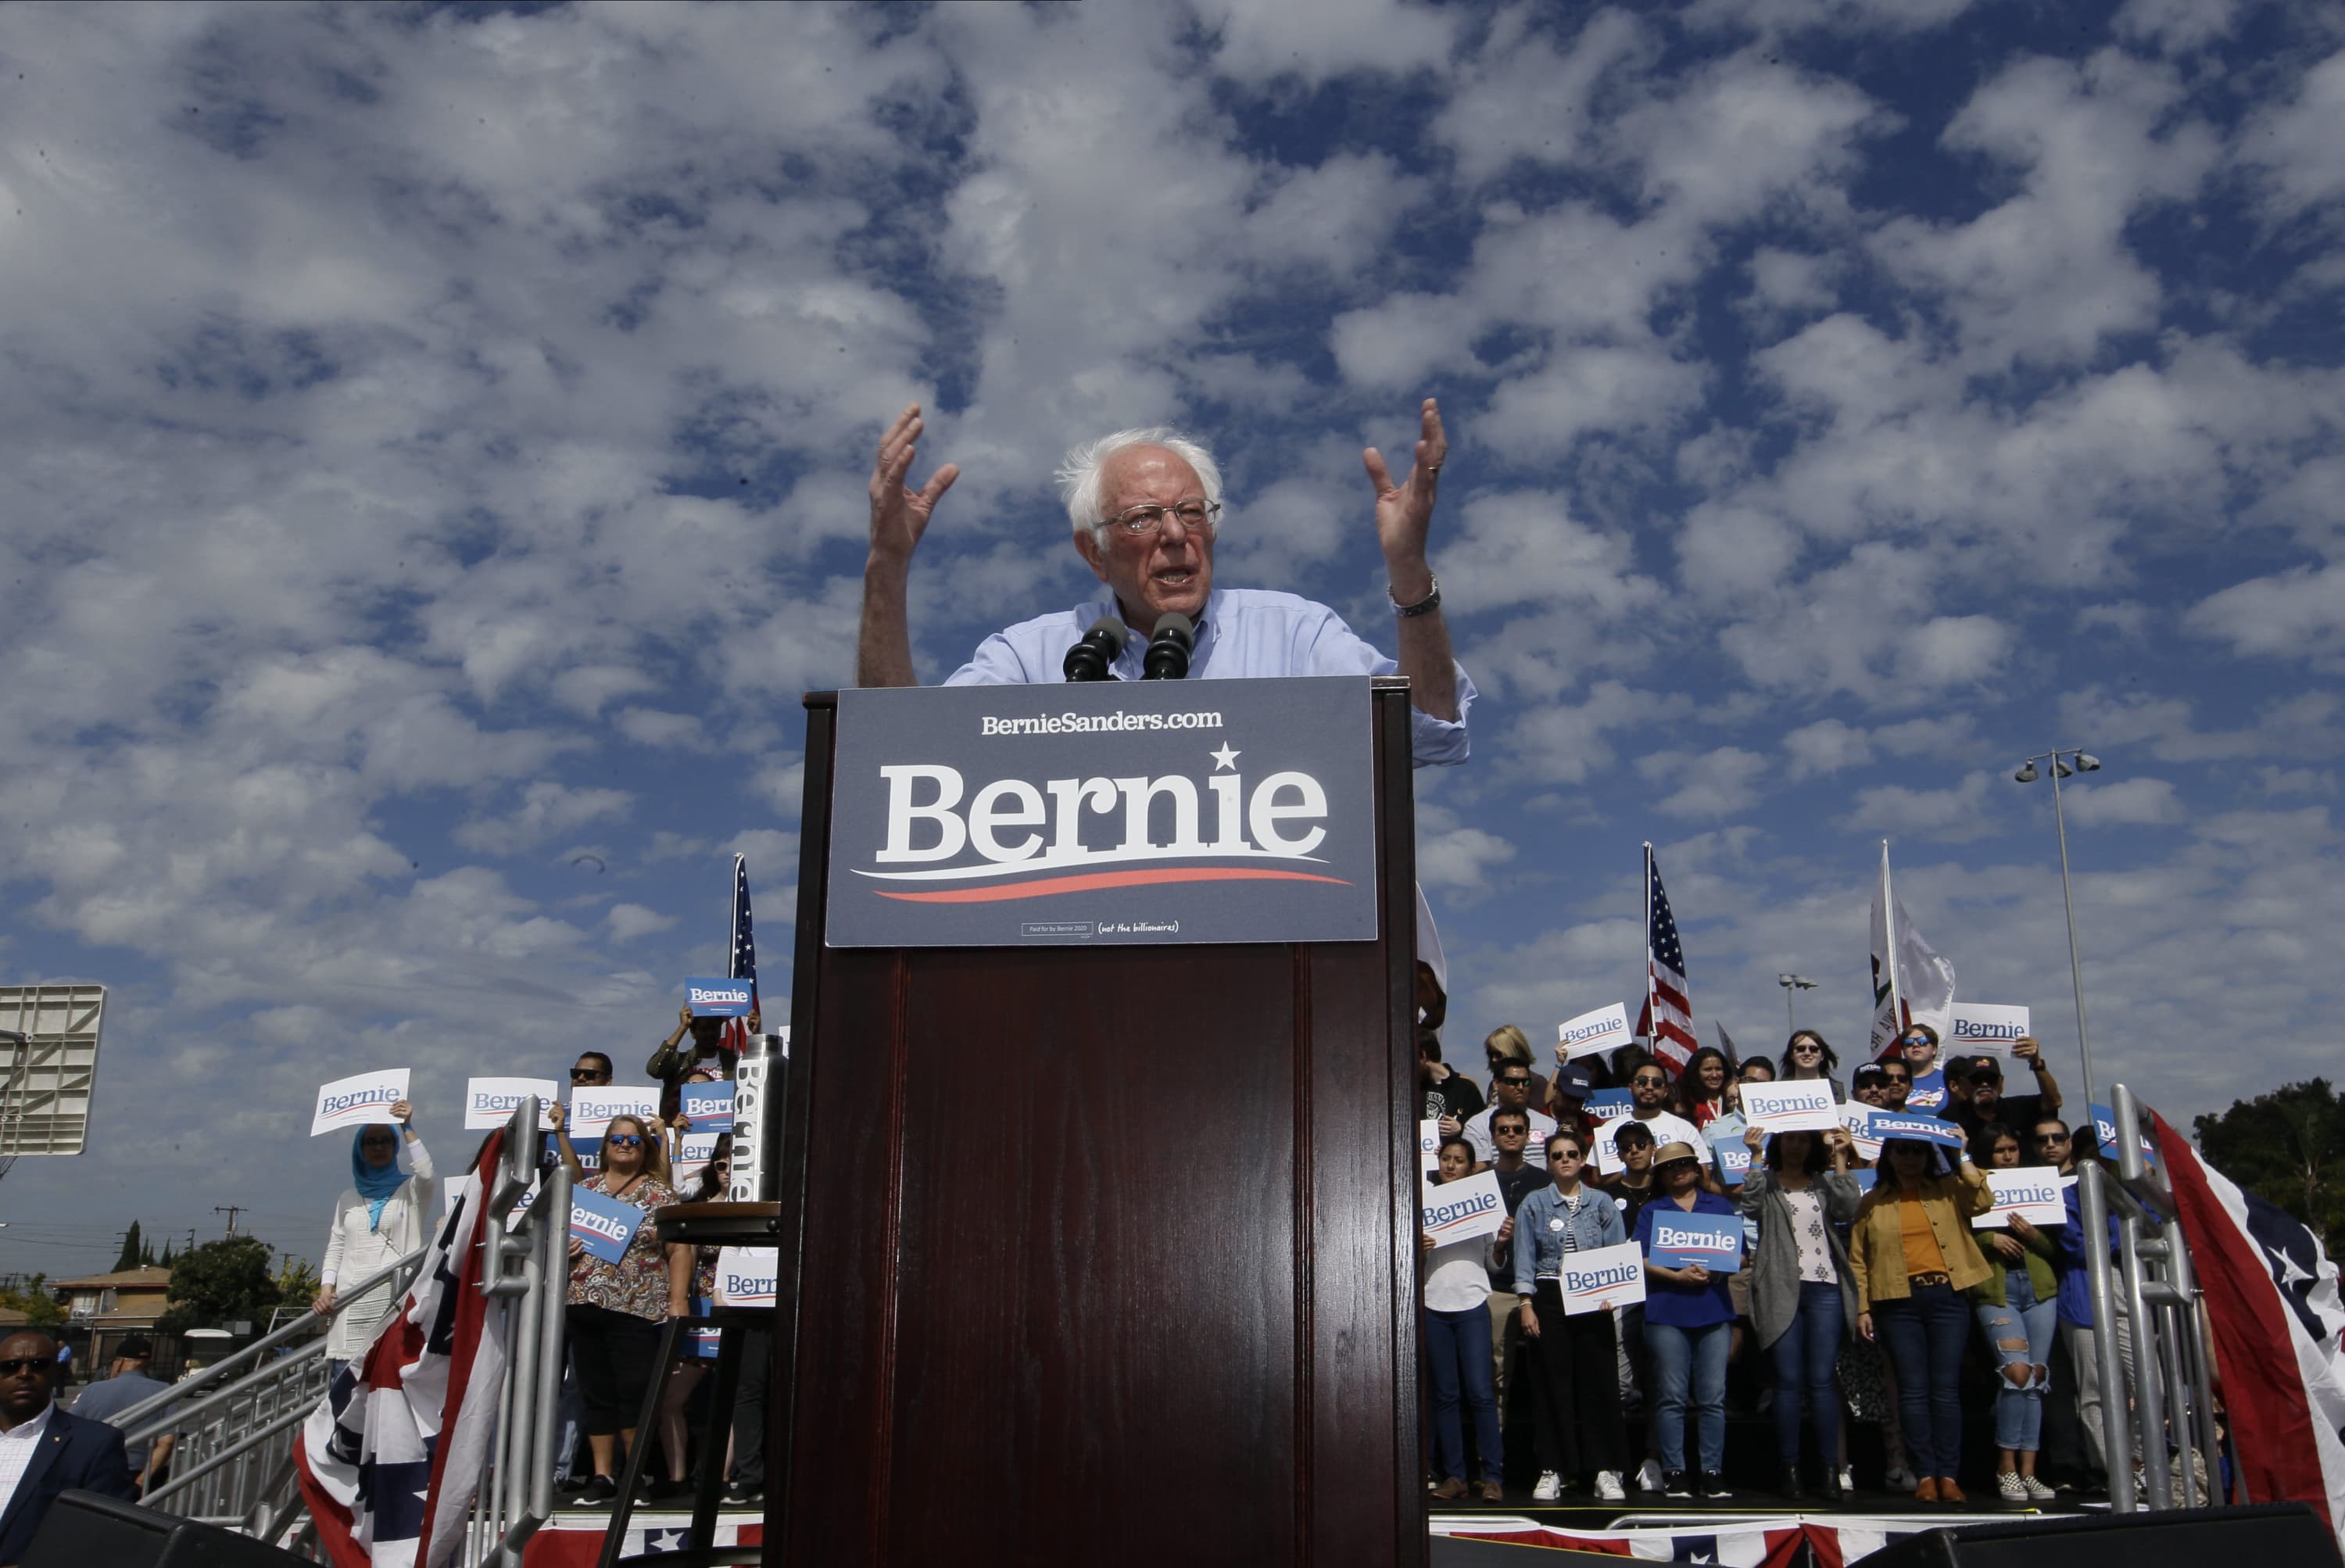 Democratic presidential candidate Sen. Bernie Sanders speaks at a campaign event at Valley High School in Santa Ana, Calif., Friday, Feb. 21, 2020. (Damian Dovarganes/AP)